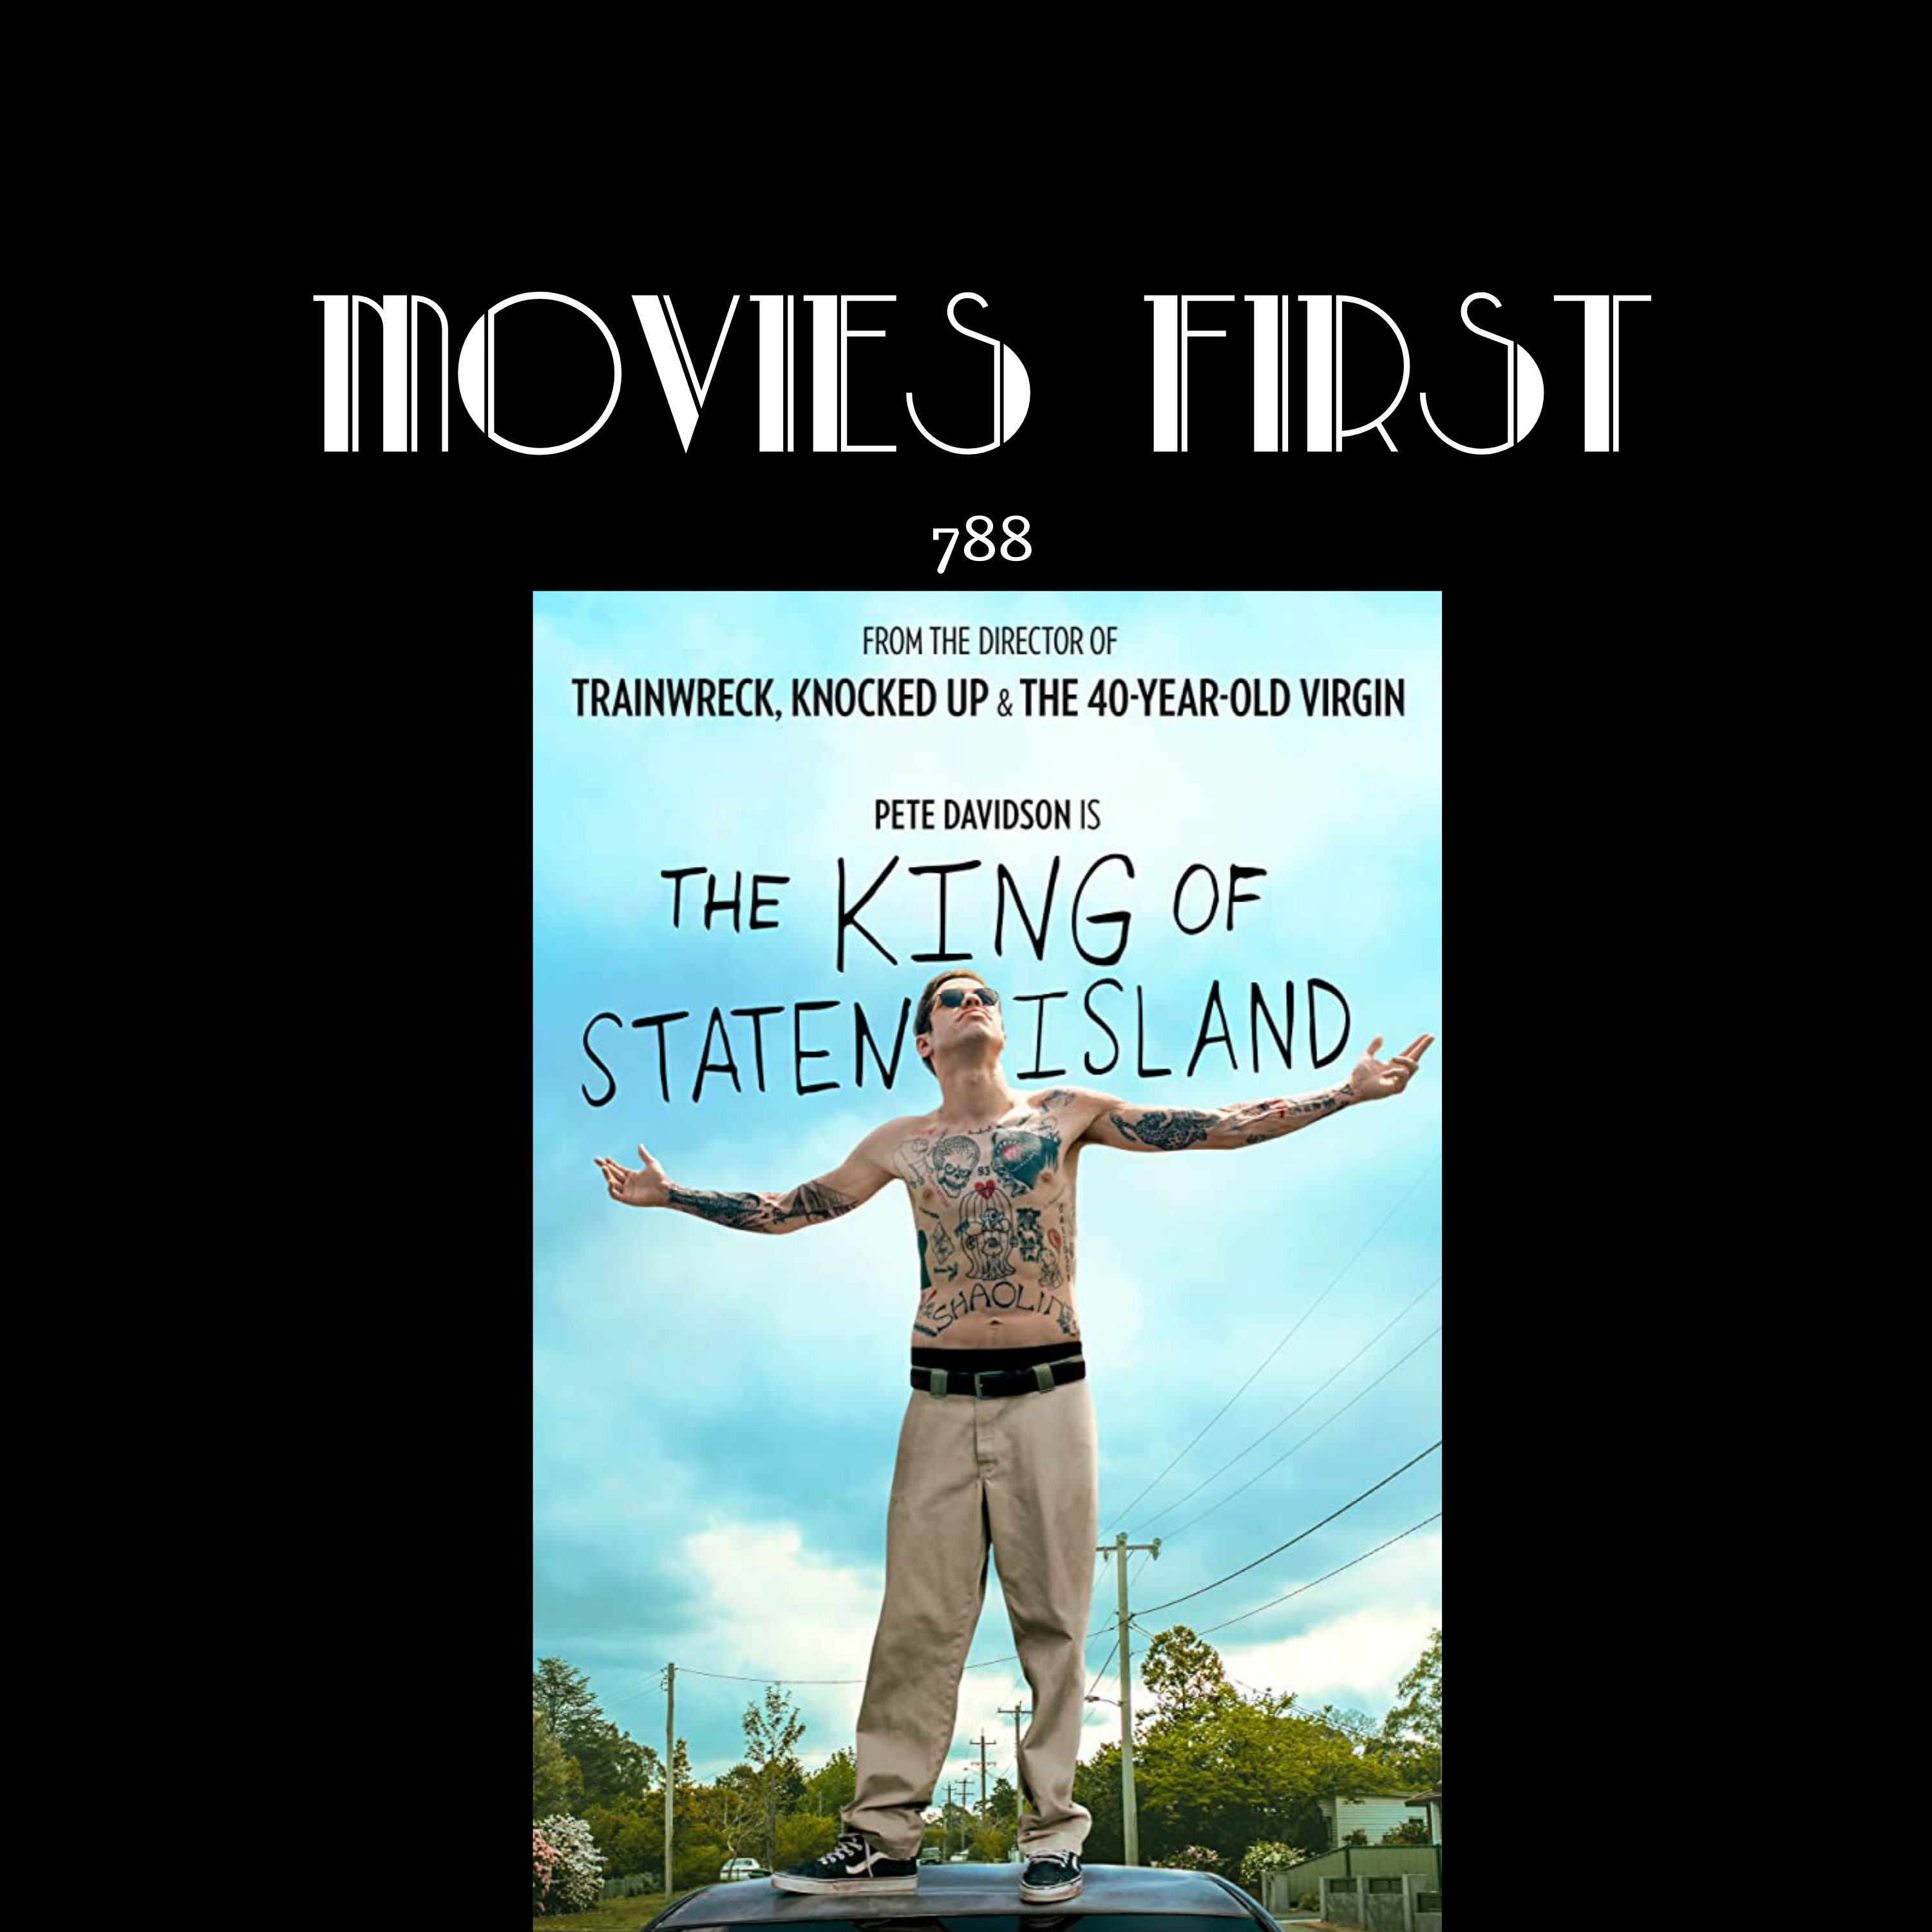 The King of Staten Island(Comedy, Drama) The @MoviesFirst review